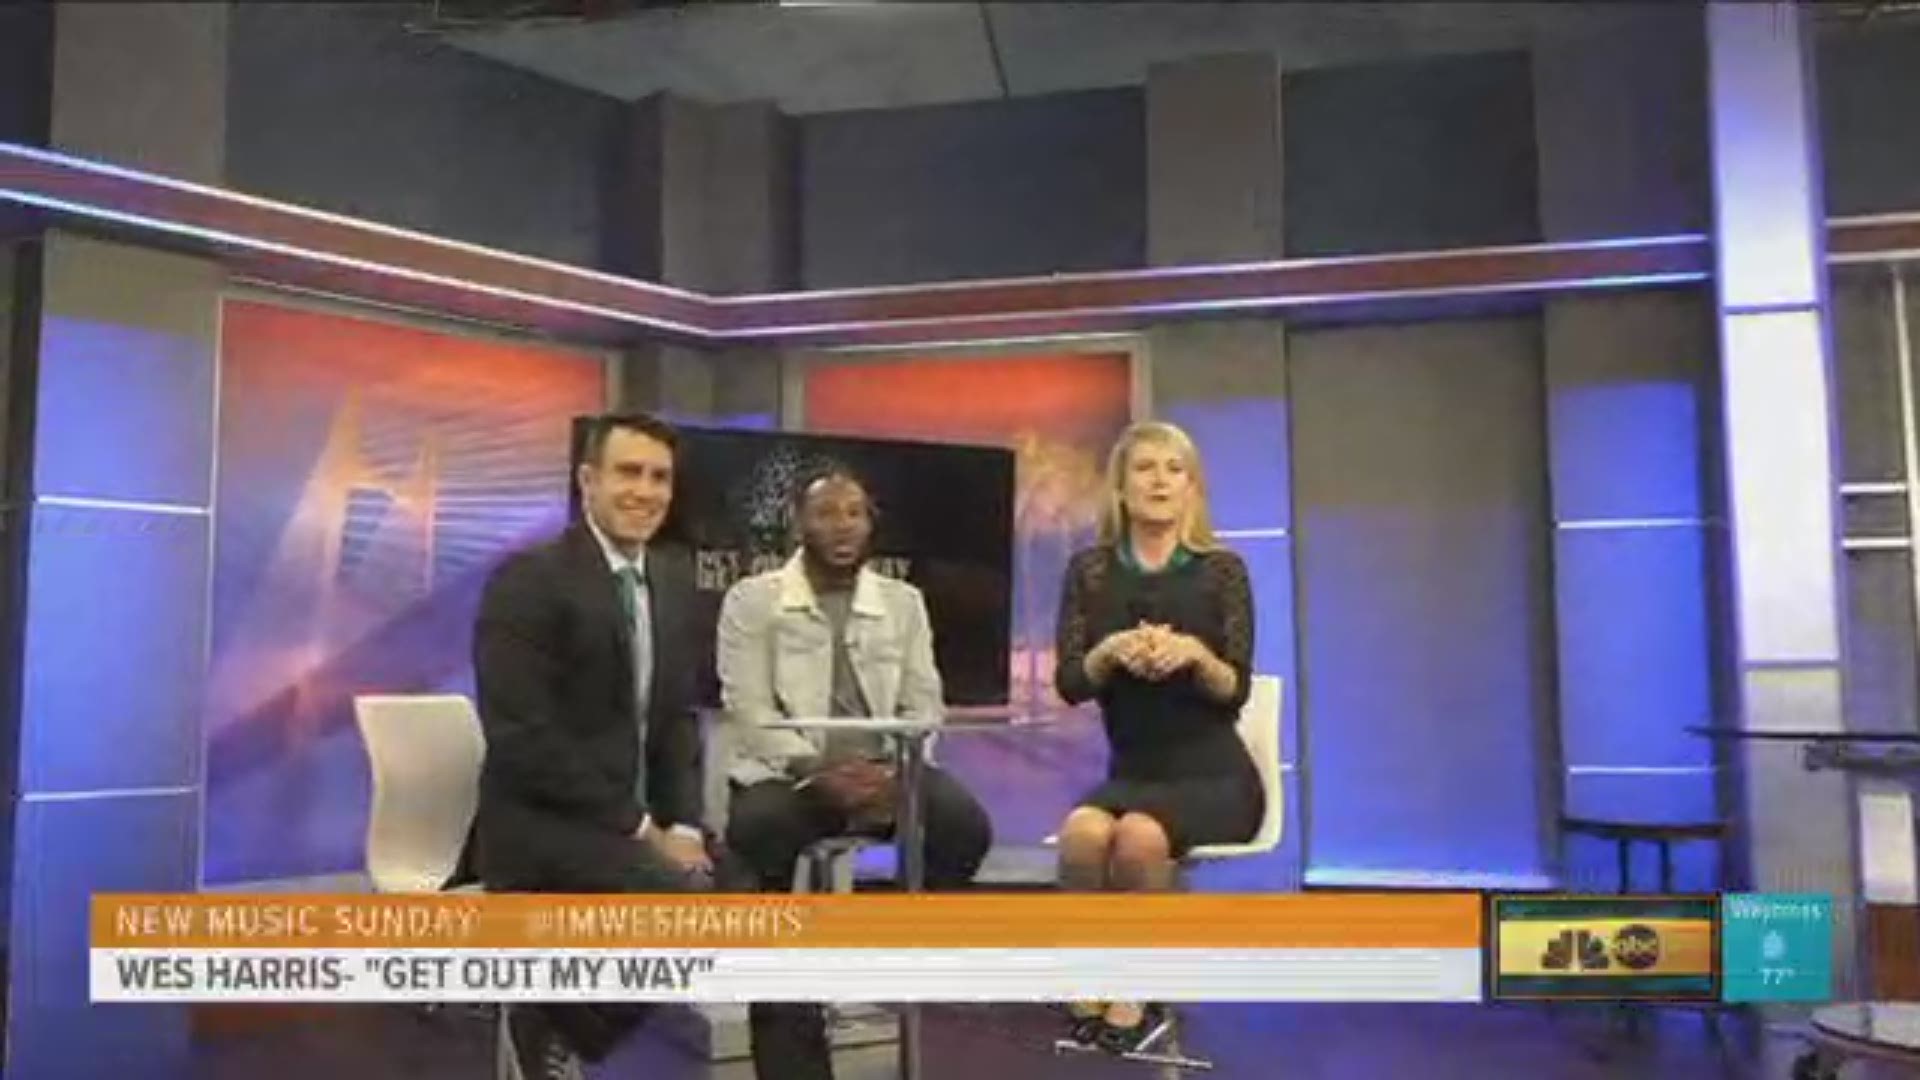 Shelby Danielsen and Steve Fundaro interview Jacksonville artist Wes Harris about his new song "Get Out My Way," perfect for getting pumped on gameday.